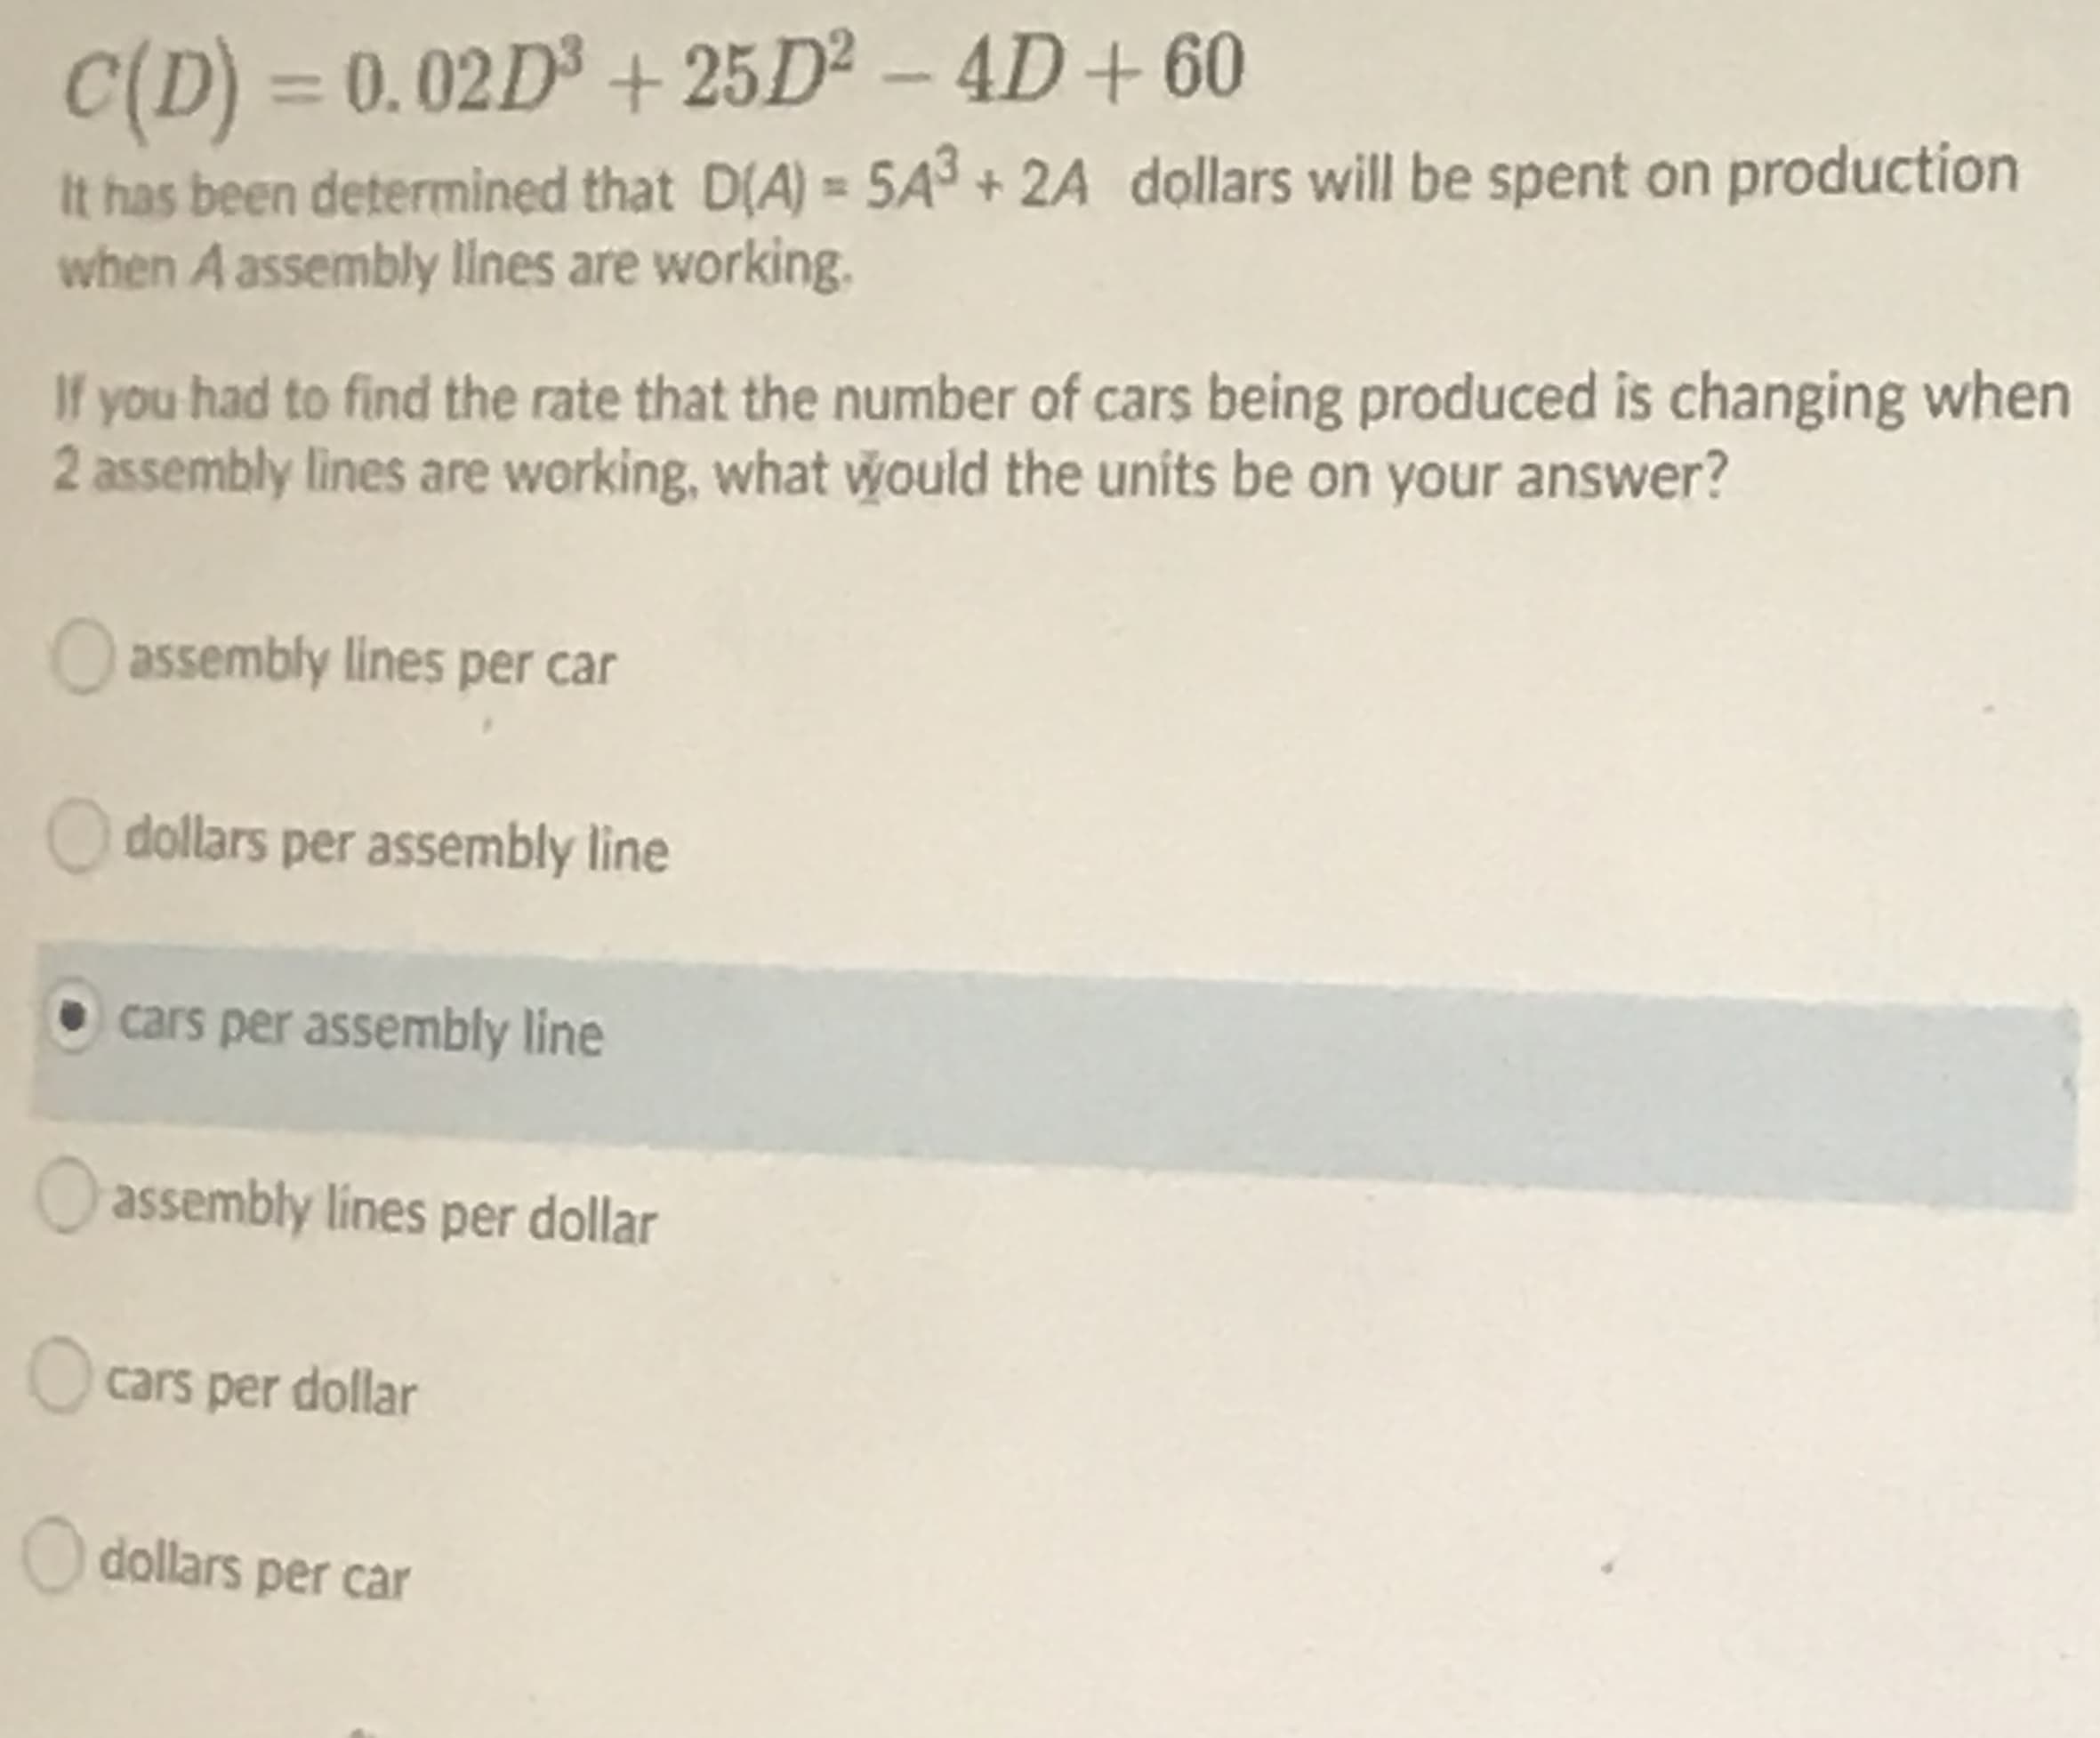 C(D) = 0.02D³ + 25D² – 4D+ 60
%3D
It has been determined that D(A) = 5A3 + 2A dollars will be spent on production
when A assembly lilnes are working.
If you had to find the rate that the number of cars being produced is changing when
2 assembly lines are working, what would the units be on your answer?
Oassembly lines per car
O dollars per assembly line
• cars per assembly line
O assembly lines per dollar
O cars per dollar
O dollars per car
